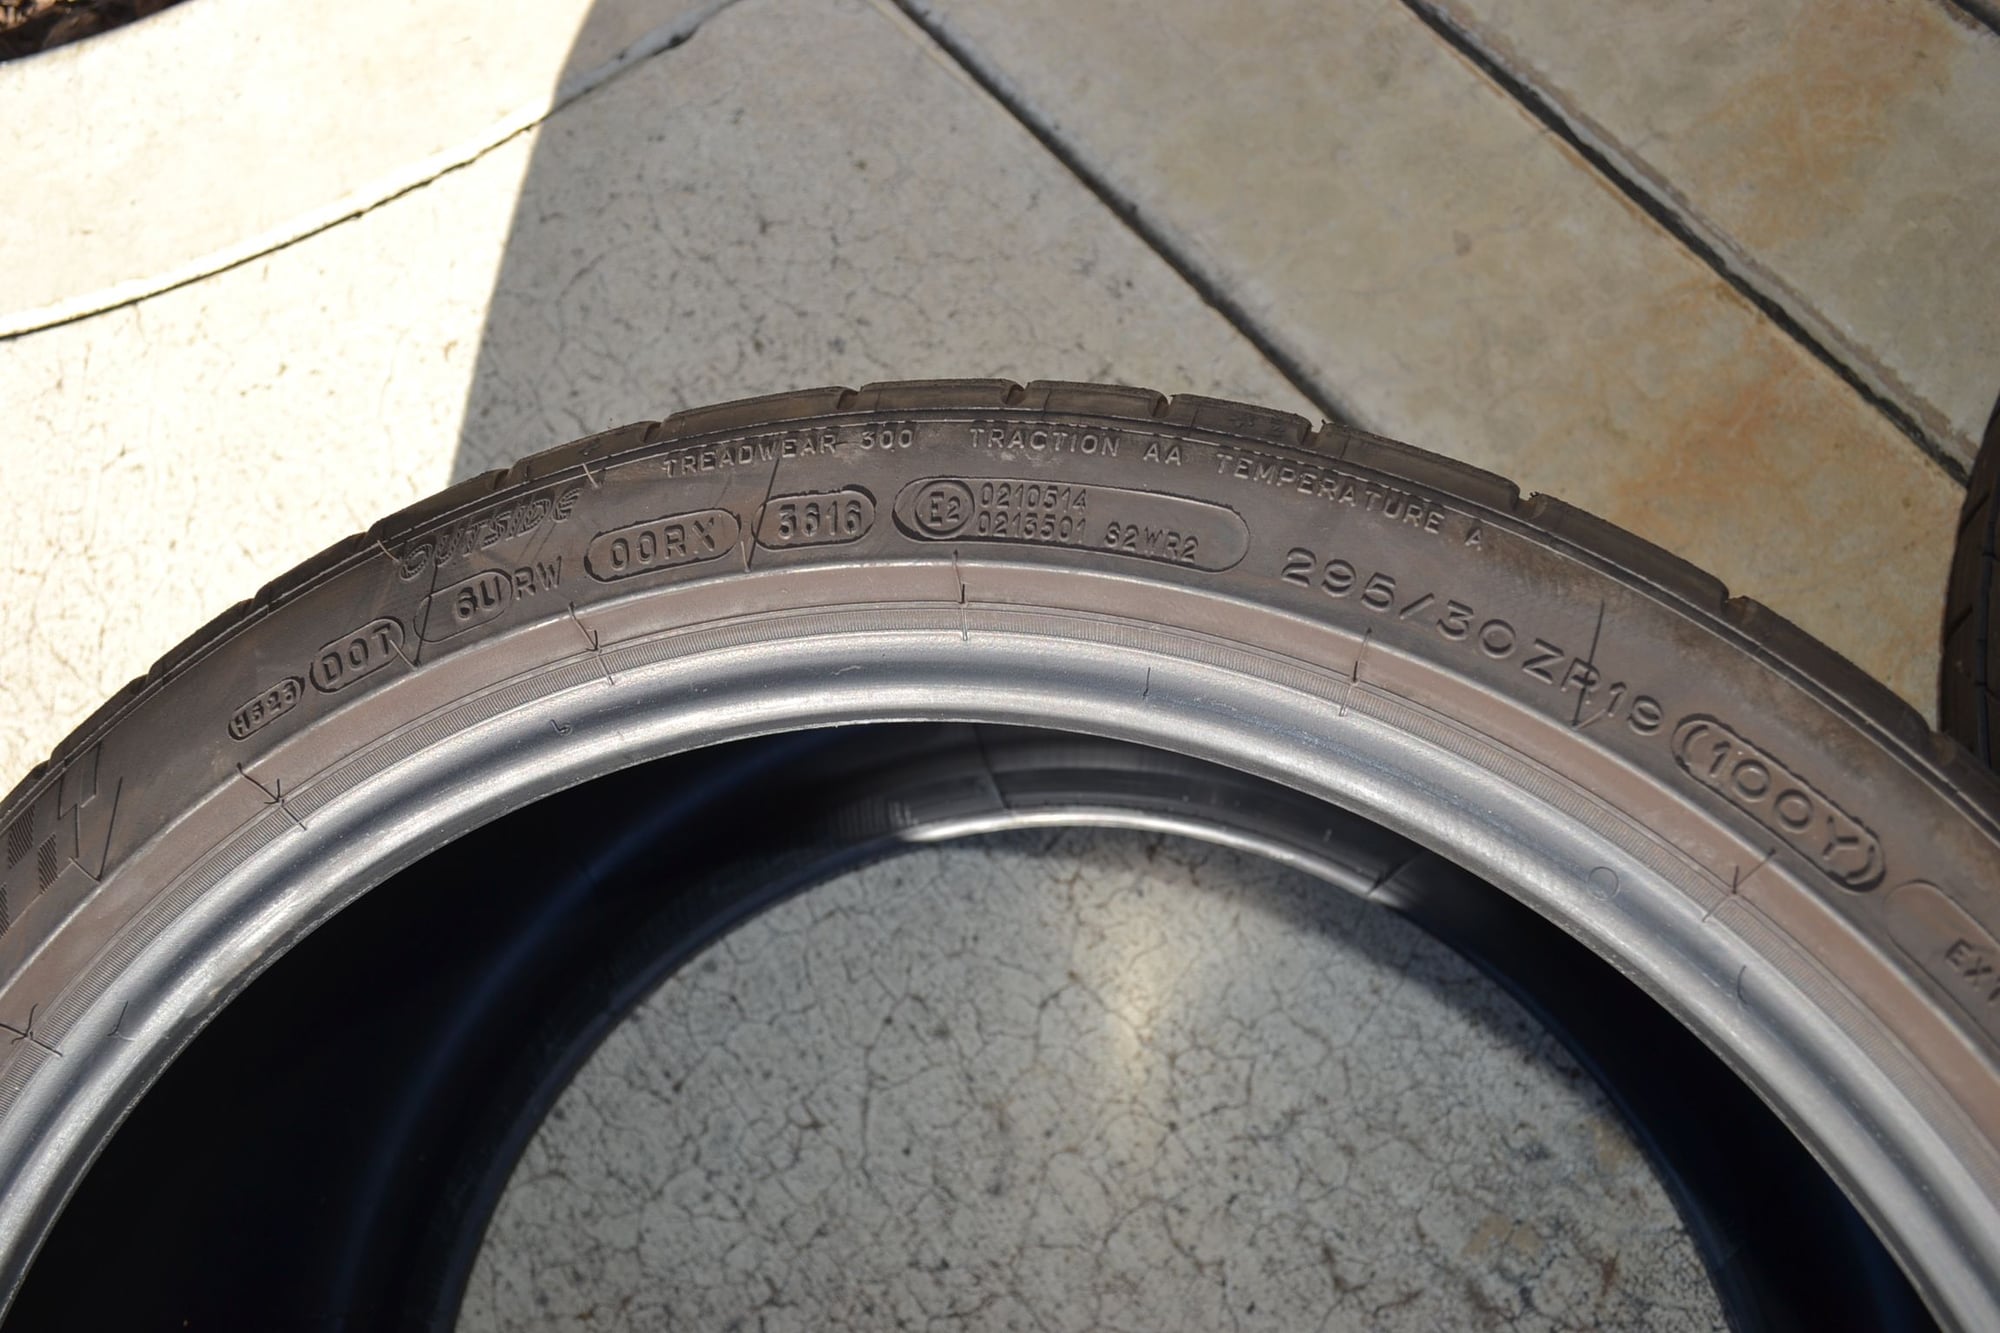 Wheels and Tires/Axles - Michelin Pilot Super Sport Tires 295/30/19 Pair (2) Free Shipping - Used - 2005 to 2012 Porsche Carrera - 1999 to 2004 Porsche Carrera - San Jose, CA 95125, United States